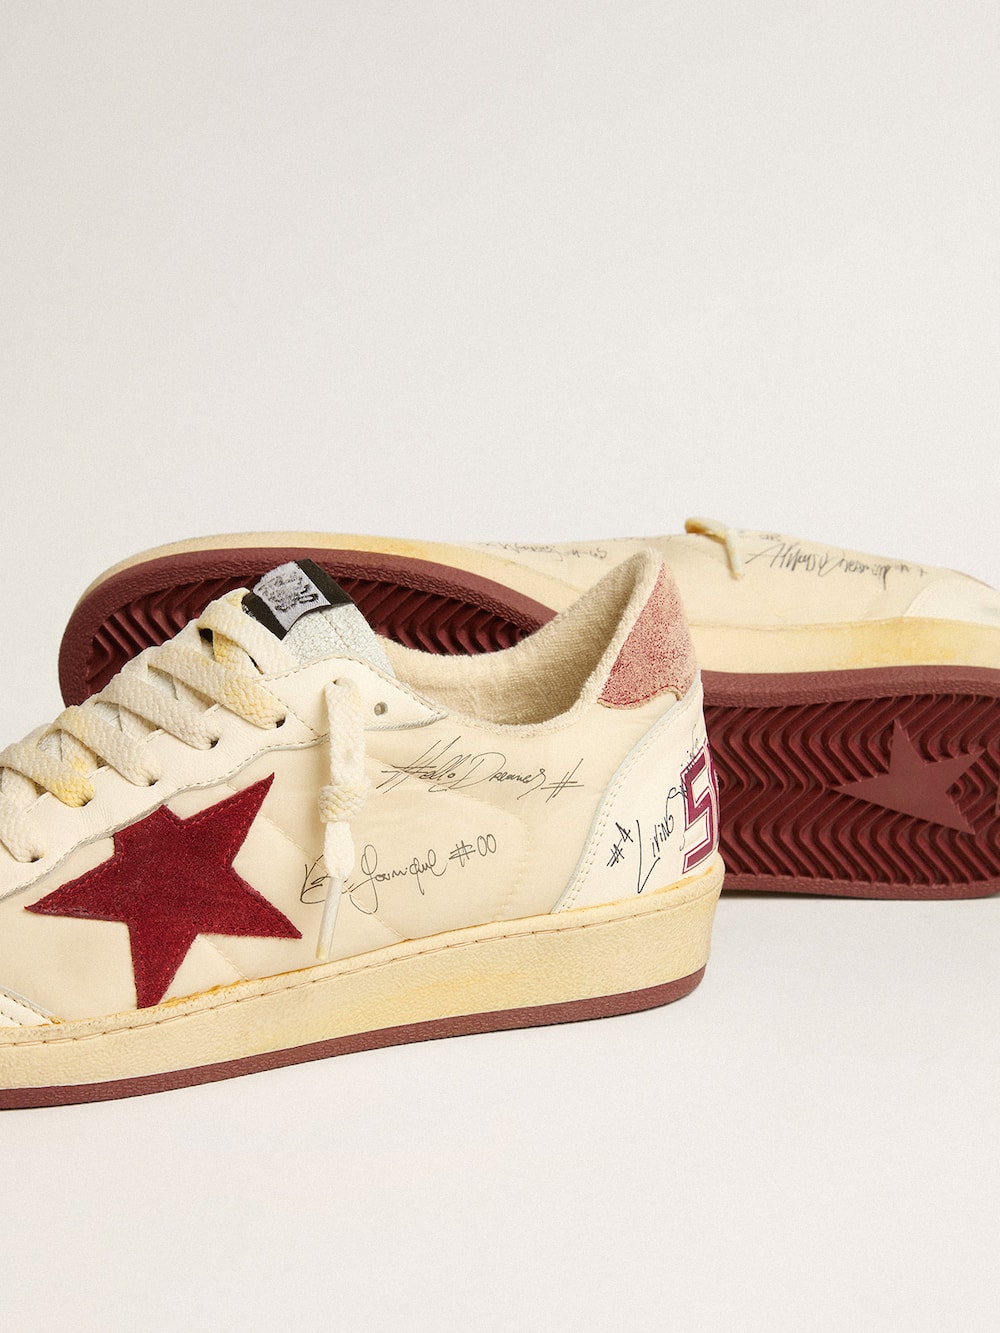 Golden Goose - Men's Ball Star LTD in nylon with pomegranate suede star and leather heel tab in 